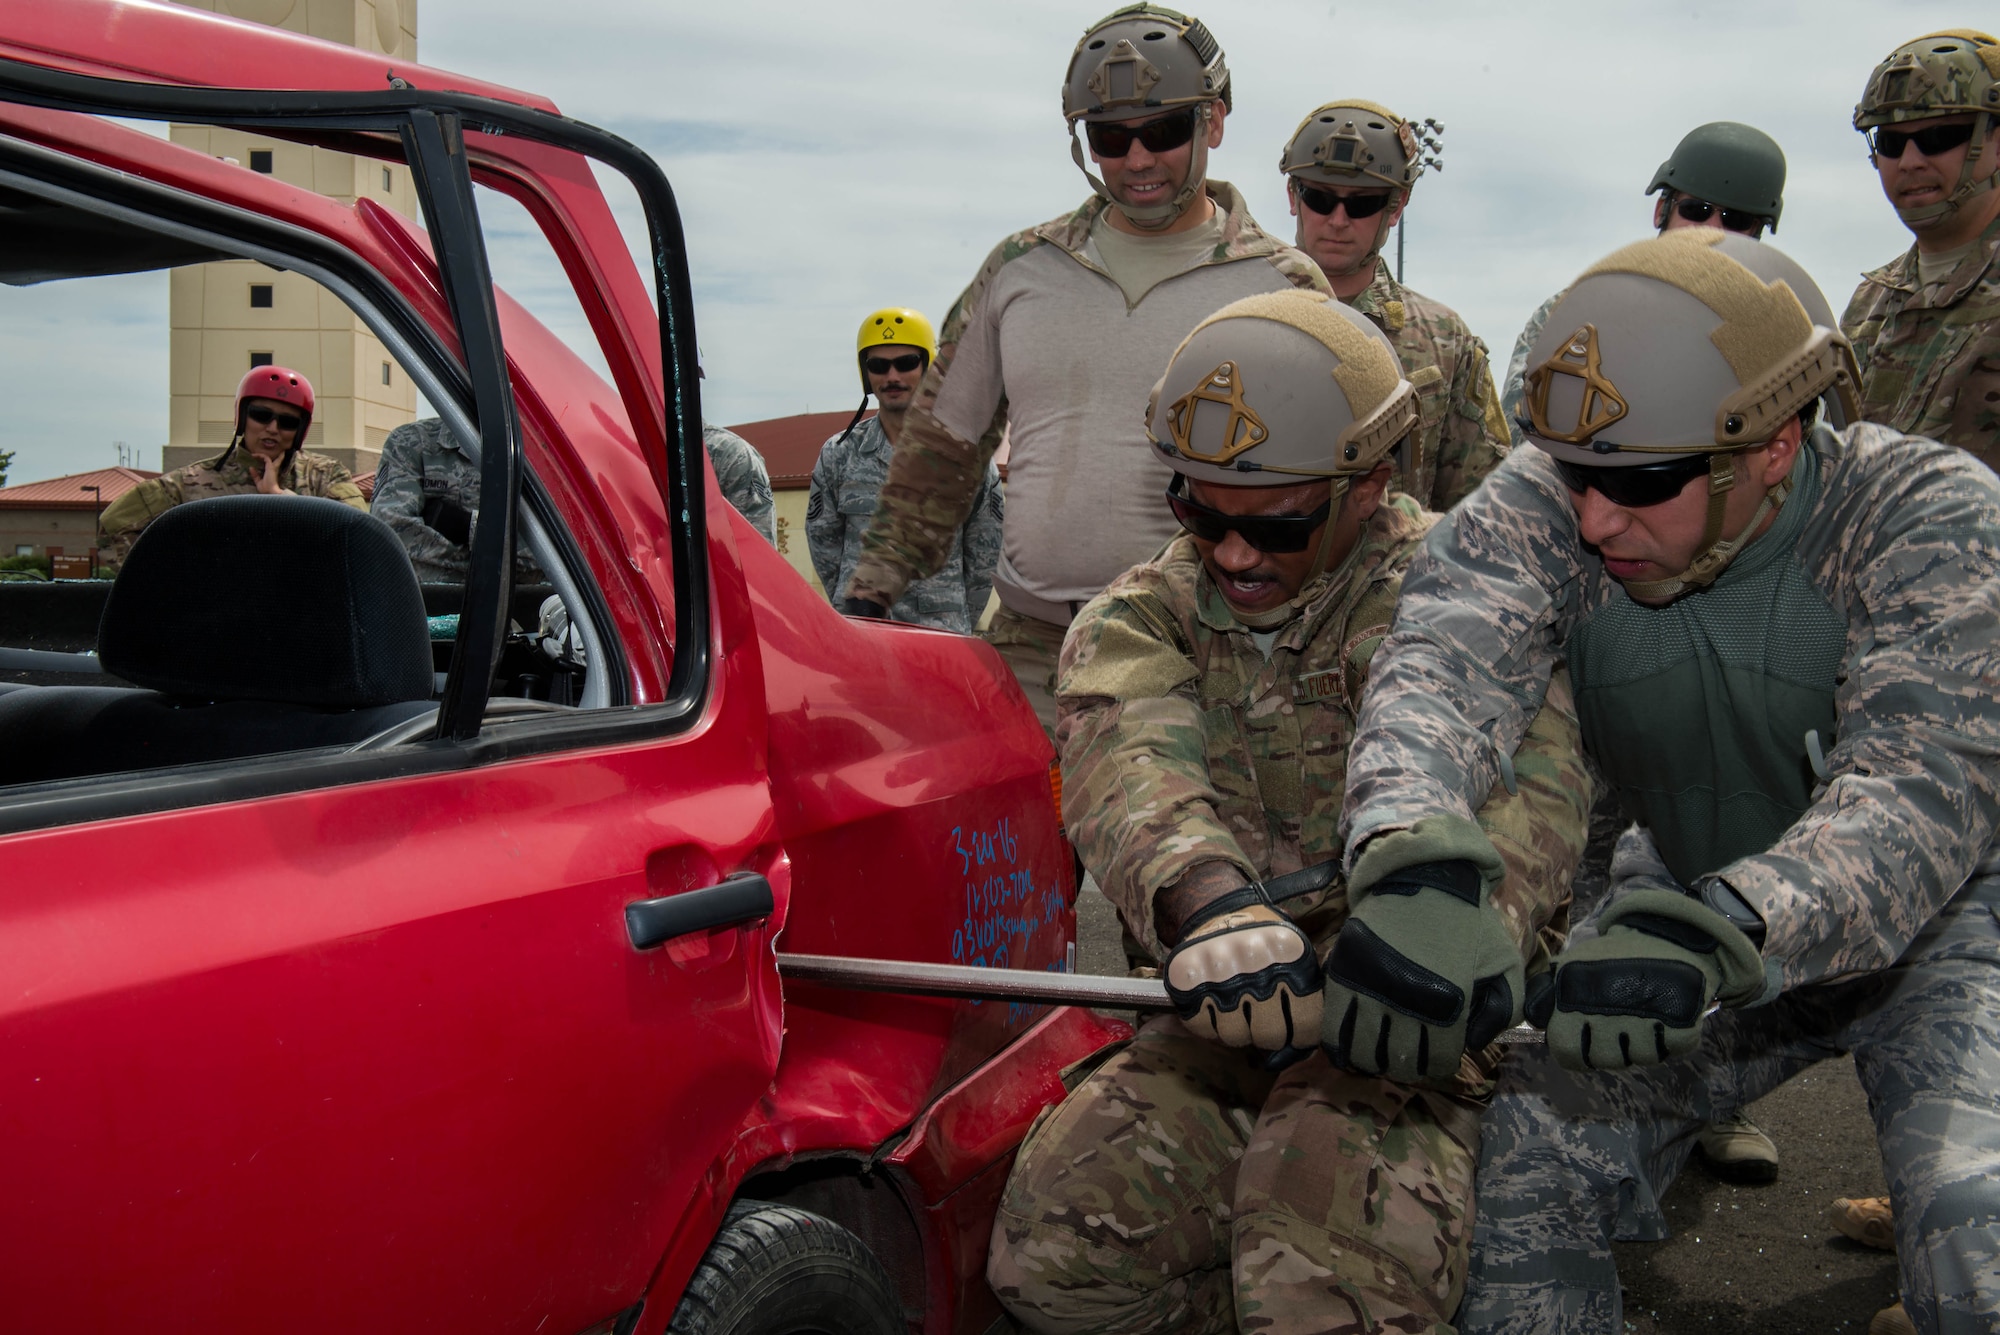 Staff Sgt. Angel Moquete, left, and Master Sgt. Edgar Gonzalez both 571st Mobility Support Advisory Squadron, work to open a car door during vehicle extrication training April 7, 2016, at Travis Air Force Base, California. The Team Travis fire department worked with the 571st Mobility Support Advisory Squadron on vehicle extrication for future deployments to South and Central America. (U.S. Air Force photo by Staff  Sgt. Robert  Hicks/Released)   